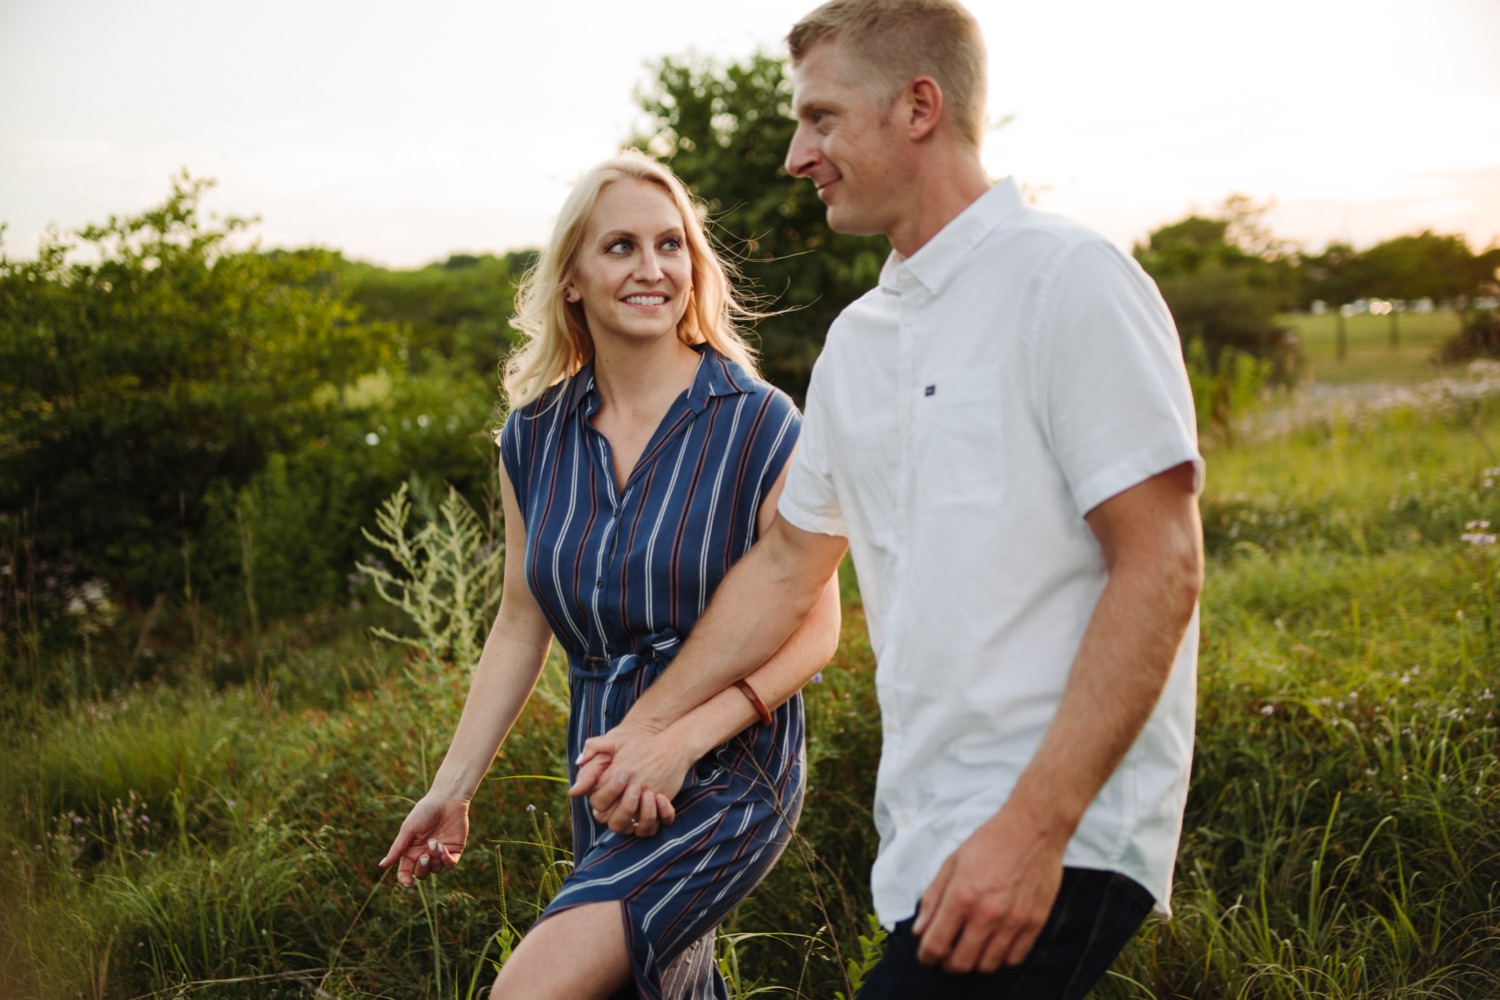 Engaged couple in summer field minneapolis photo session